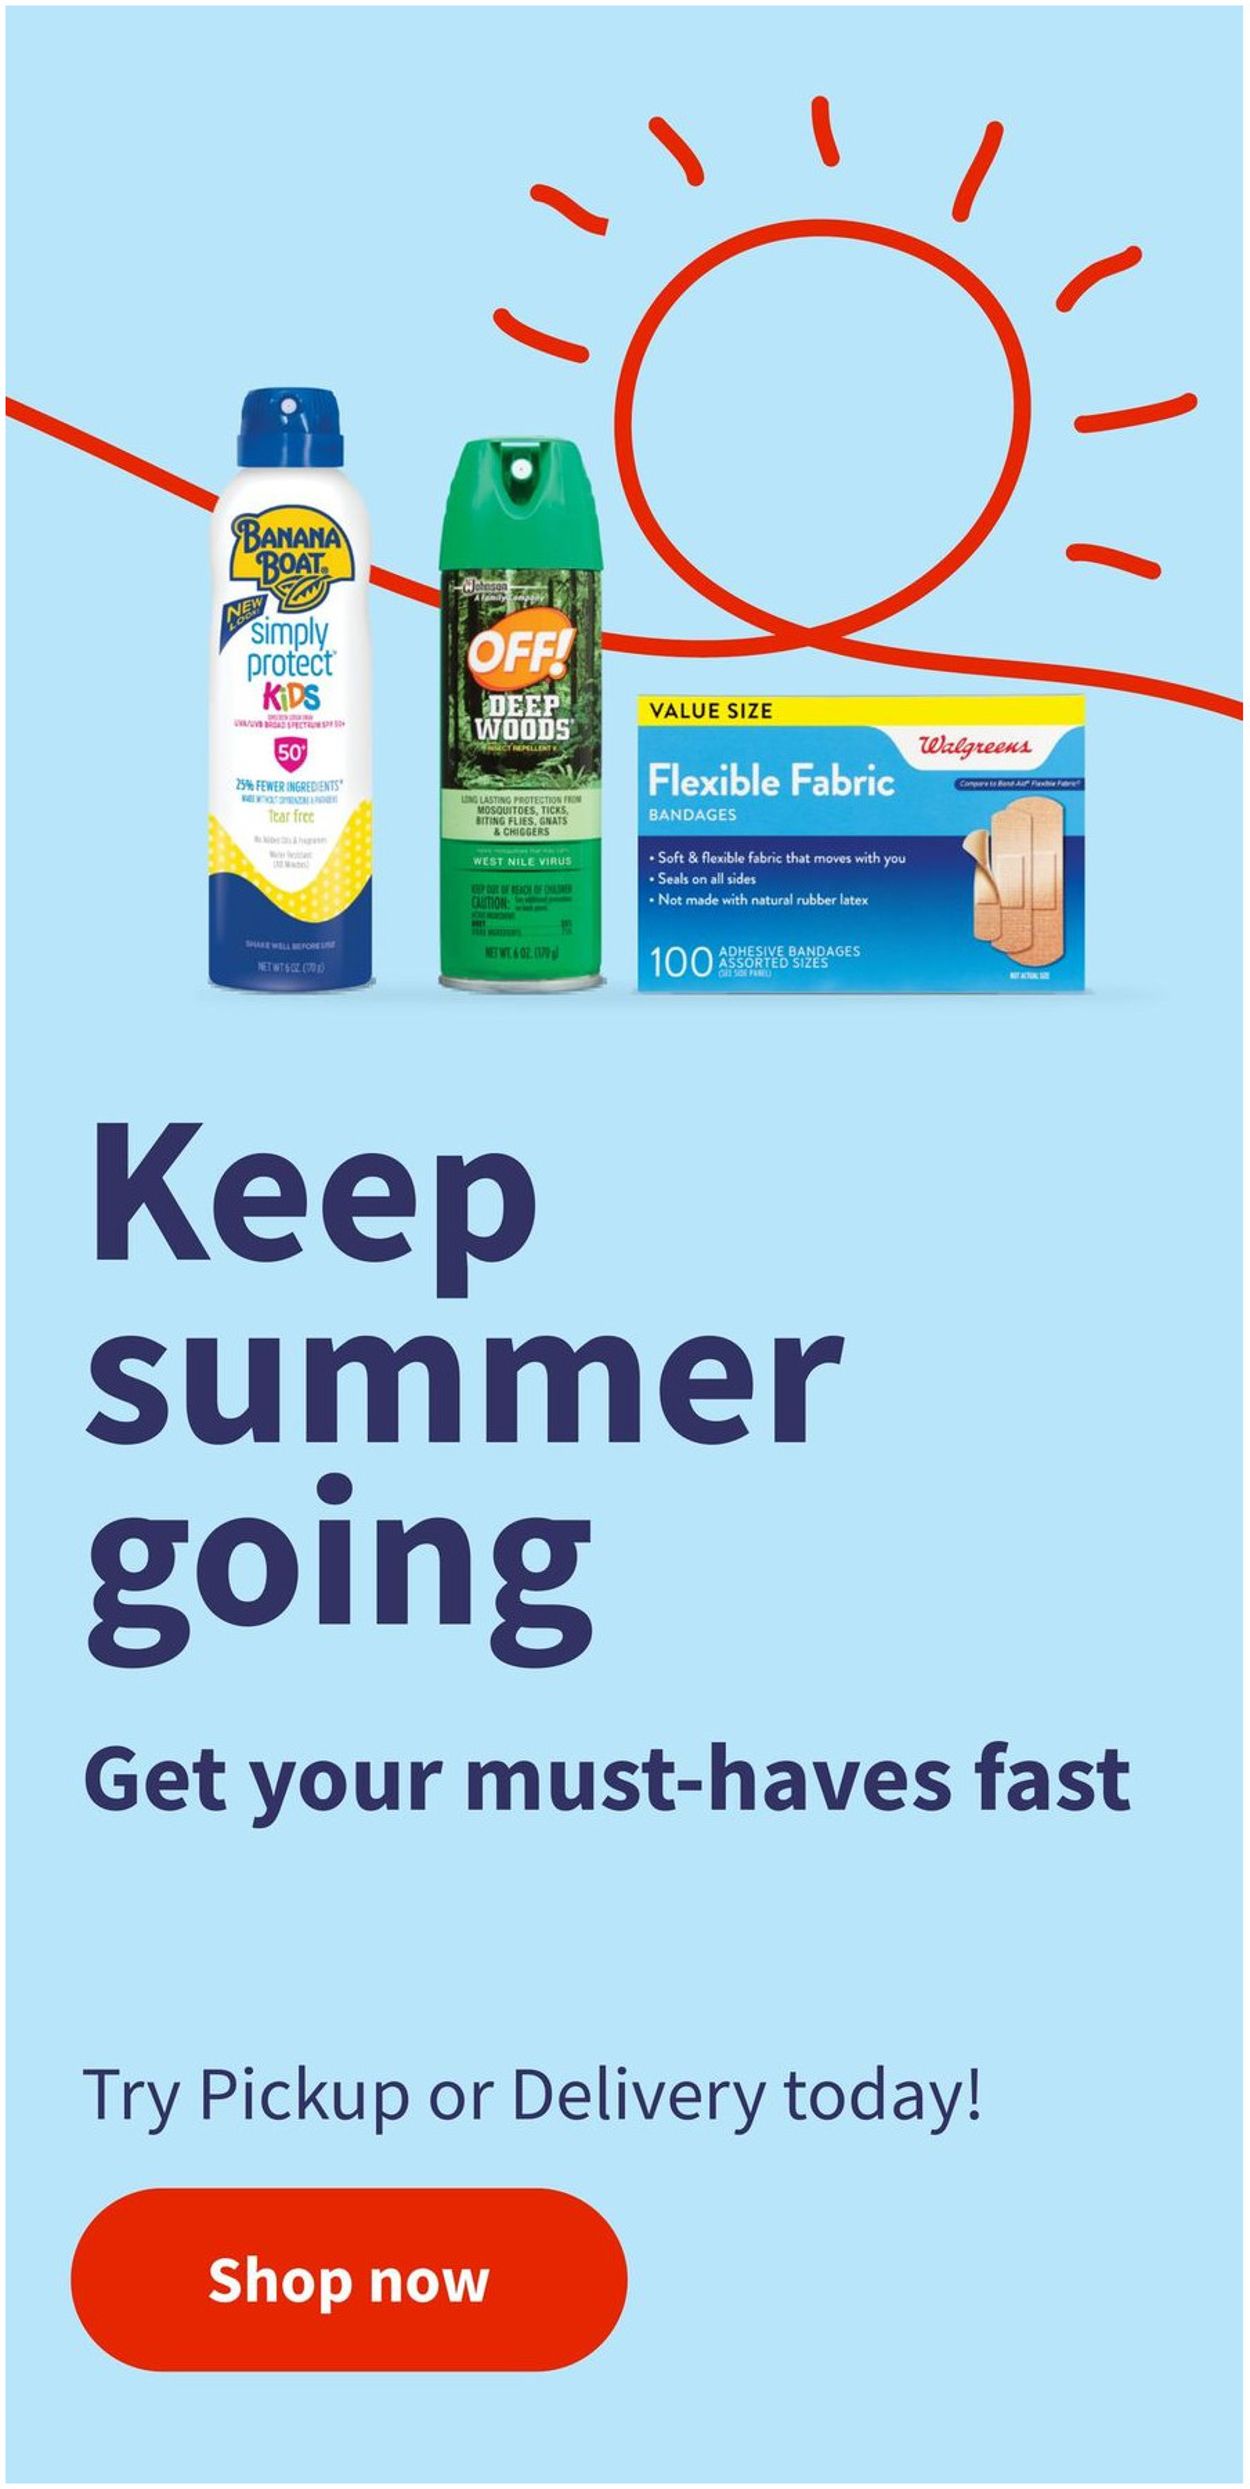 Walgreens Ad from 07/11/2021